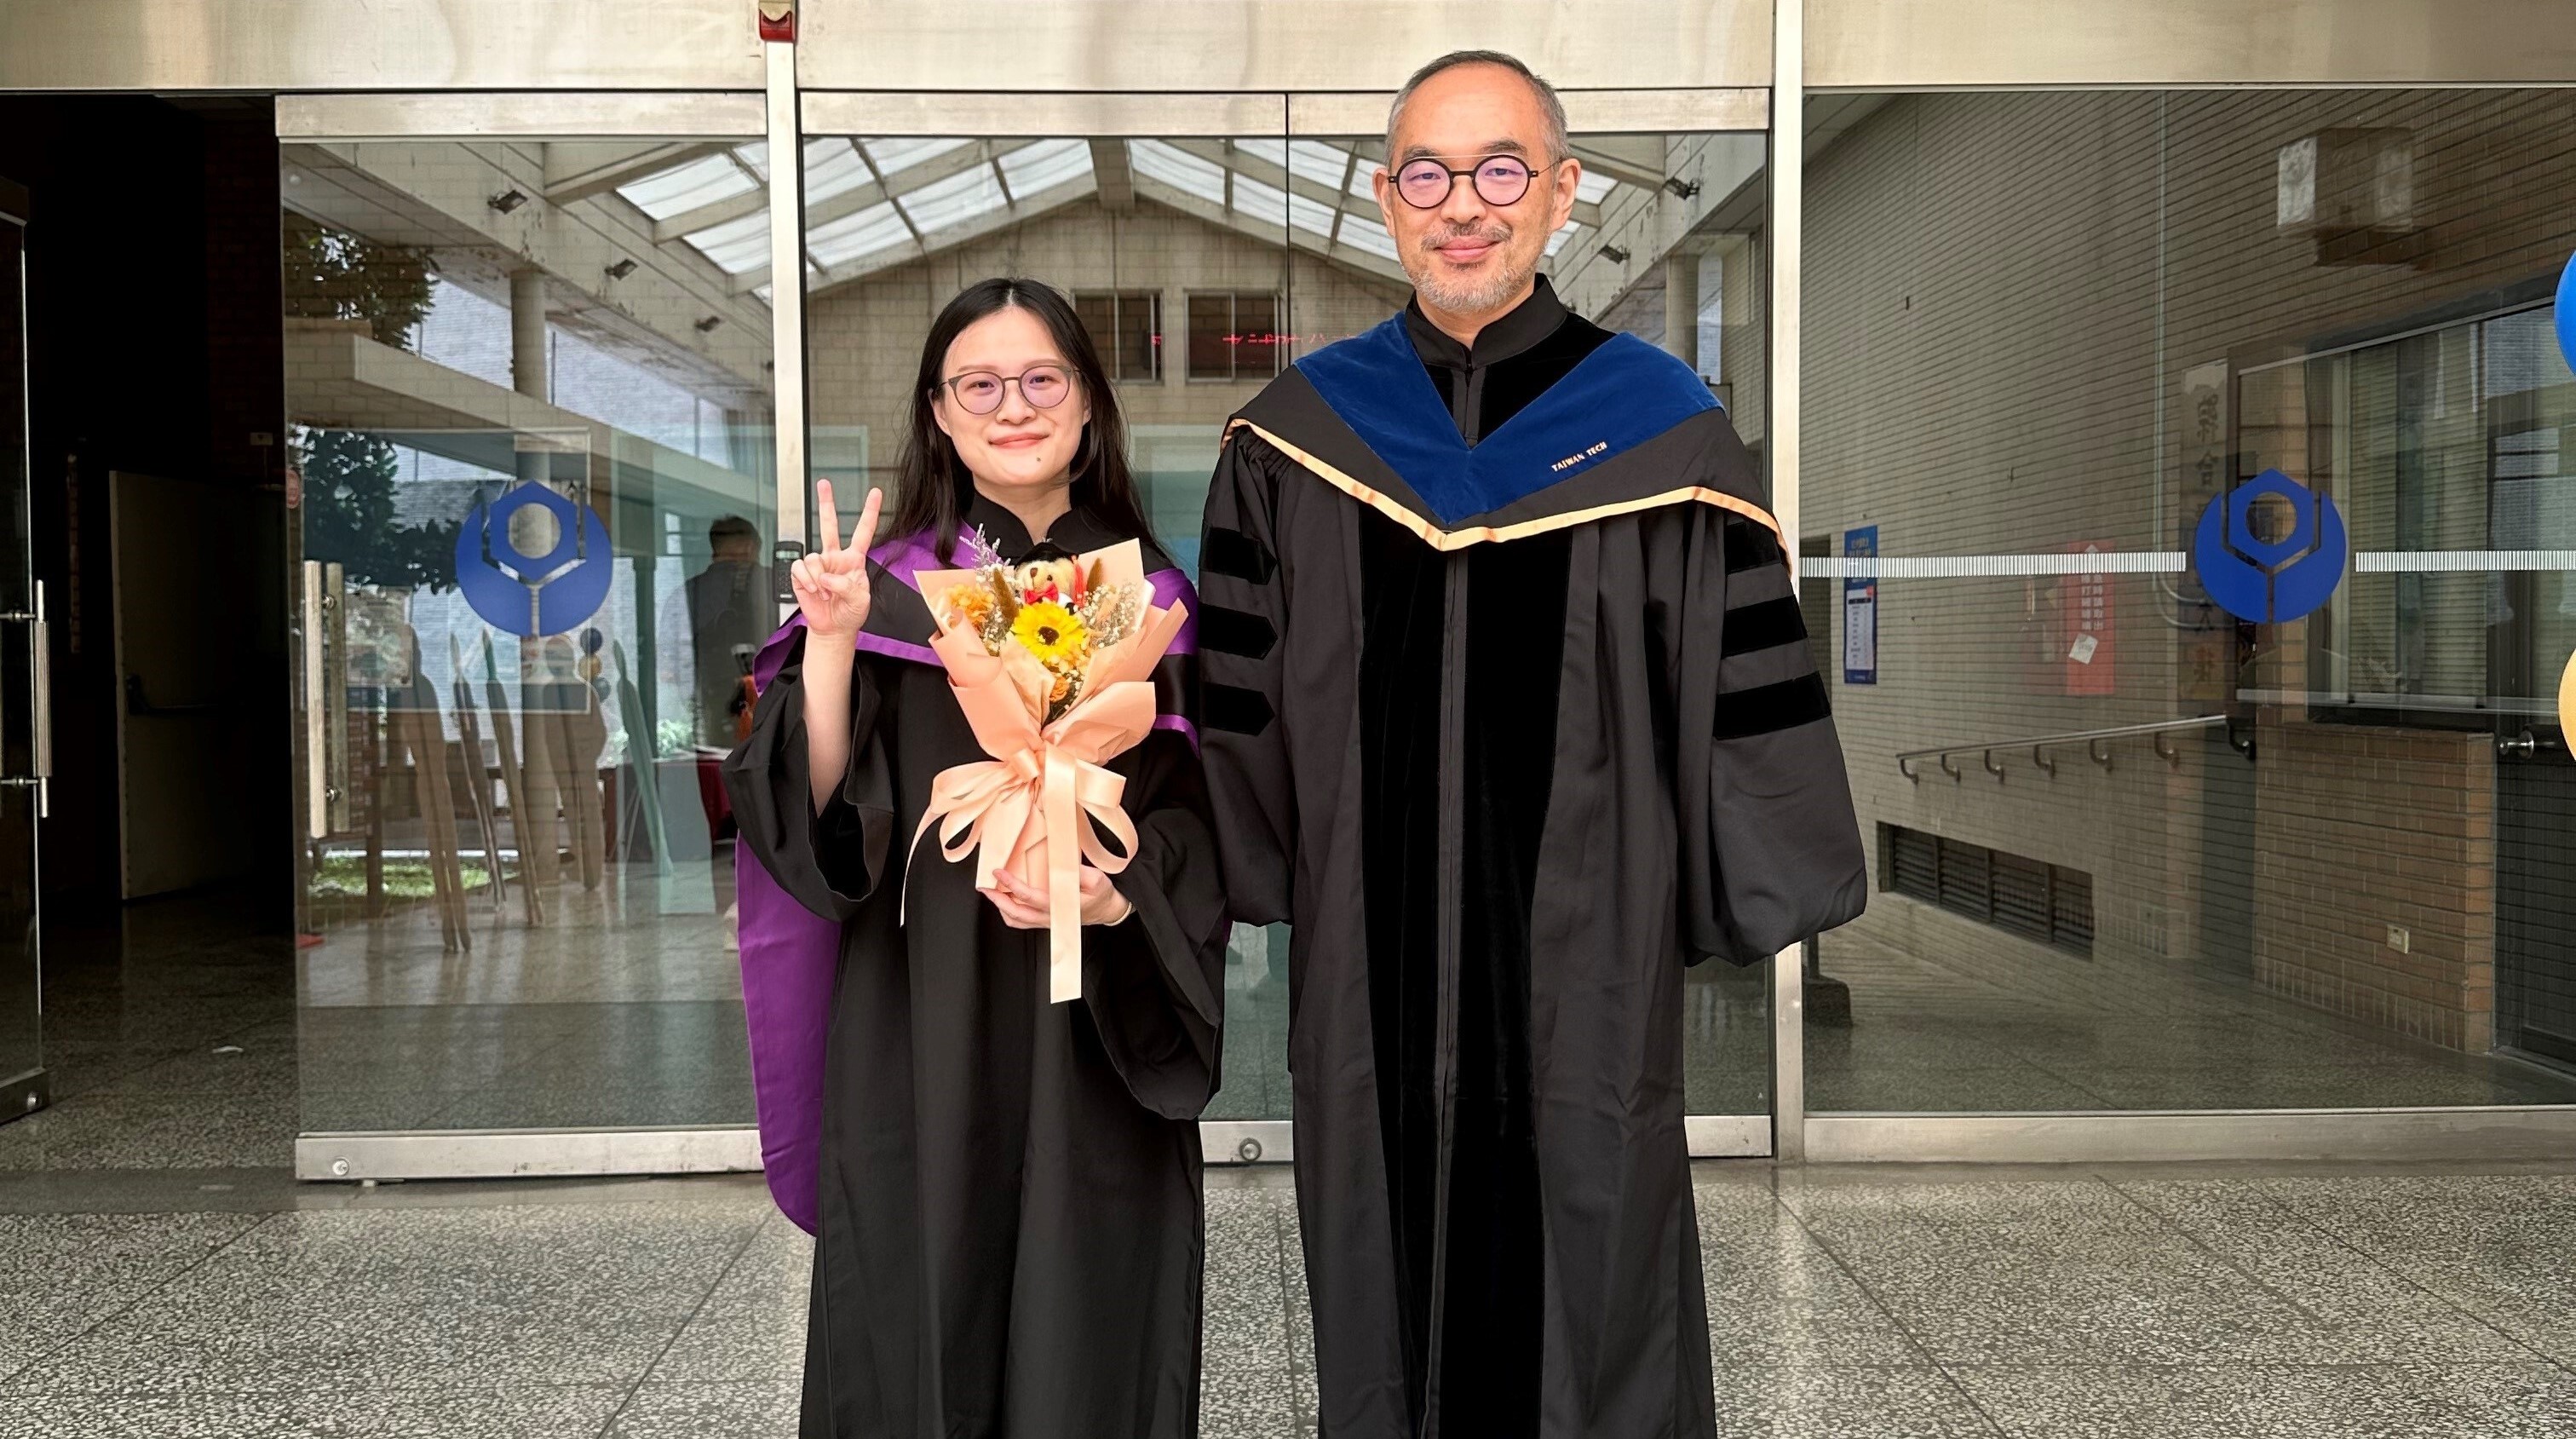 Xiao-Tong Liu (left) and her mentor, Professor I-Hsu Chiu from the Department of Architecture (right), in a photo together.